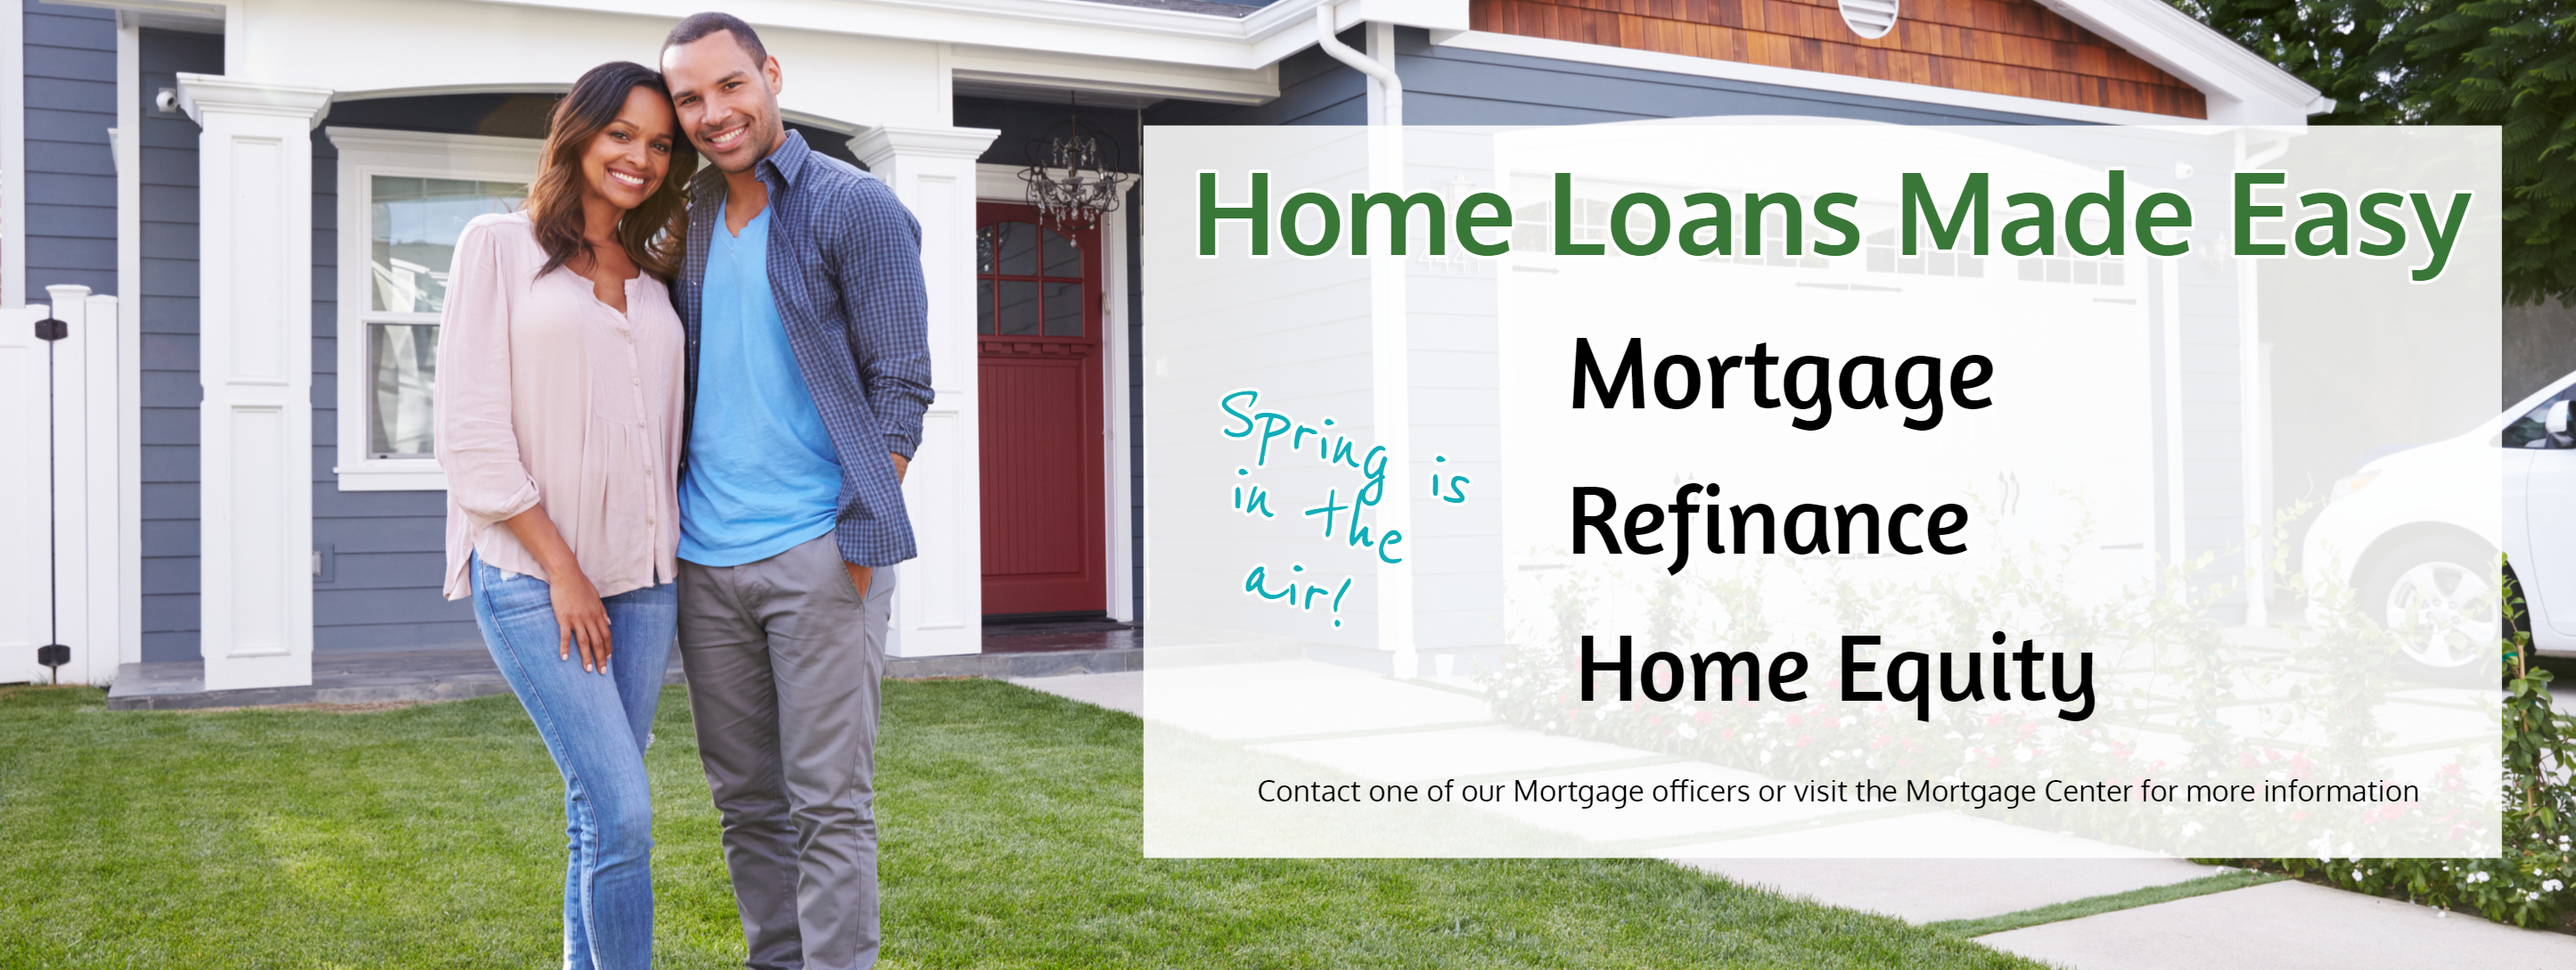 Home Loans Made Easy. Spring is in the air. Mortgage Refinane Home Equity.